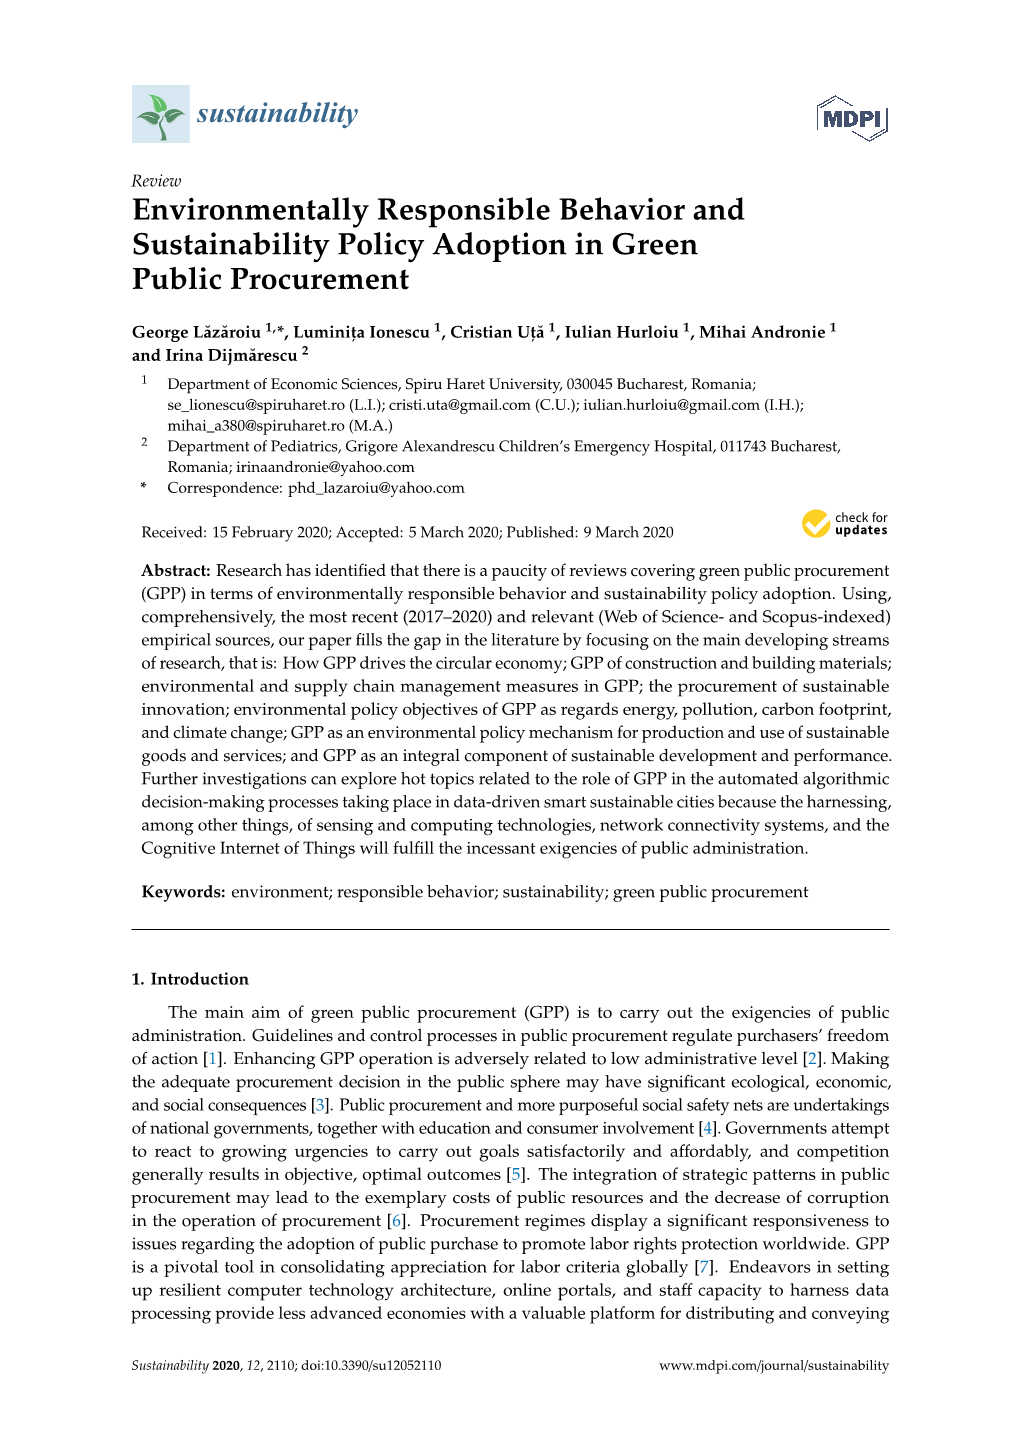 Environmentally Responsible Behavior and Sustainability Policy Adoption in Green Public Procurement